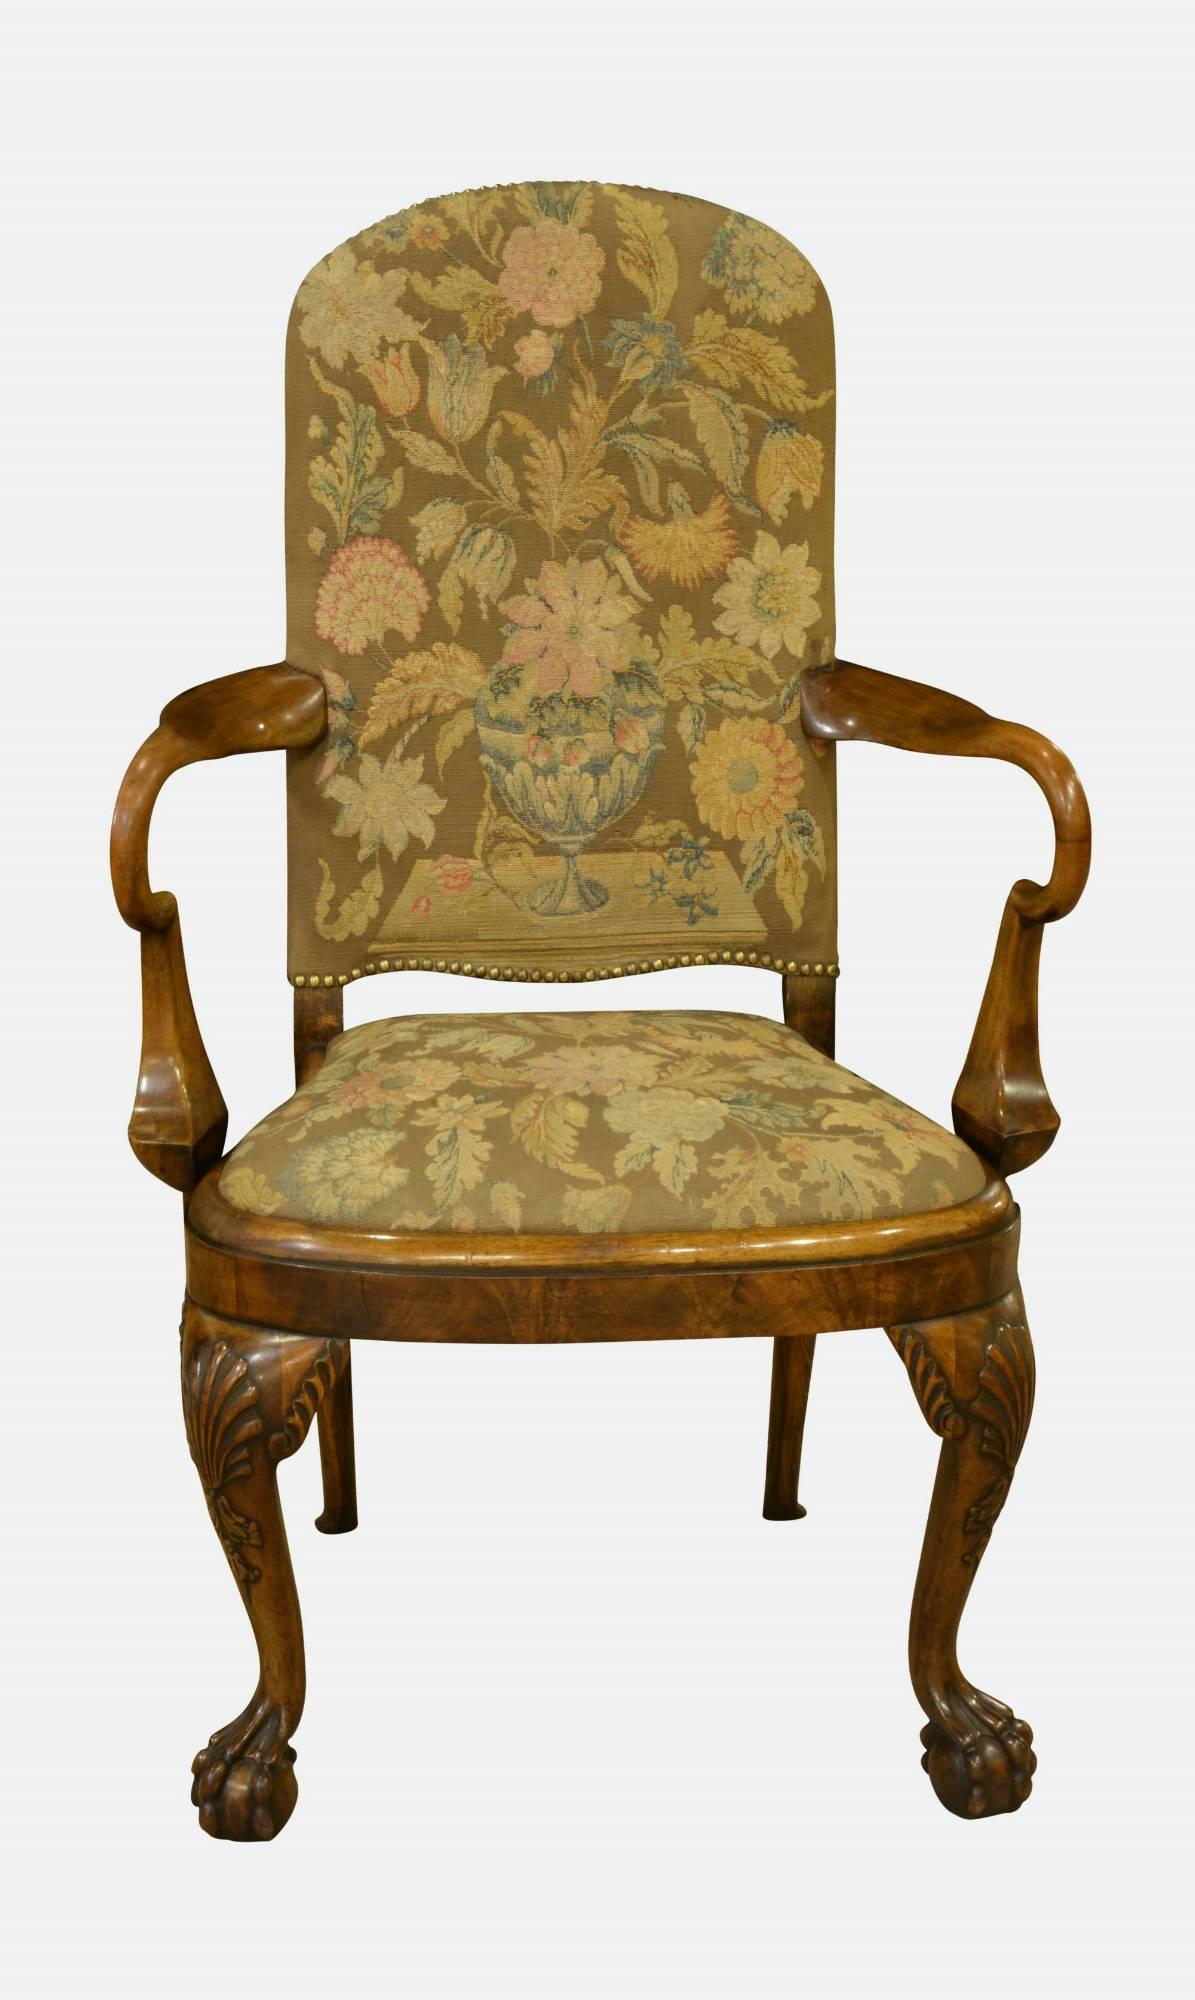 A pair of walnut open-arm Queen-Anne style armchairs with Flemish flat-weave tapestry coverings, circa 1910.